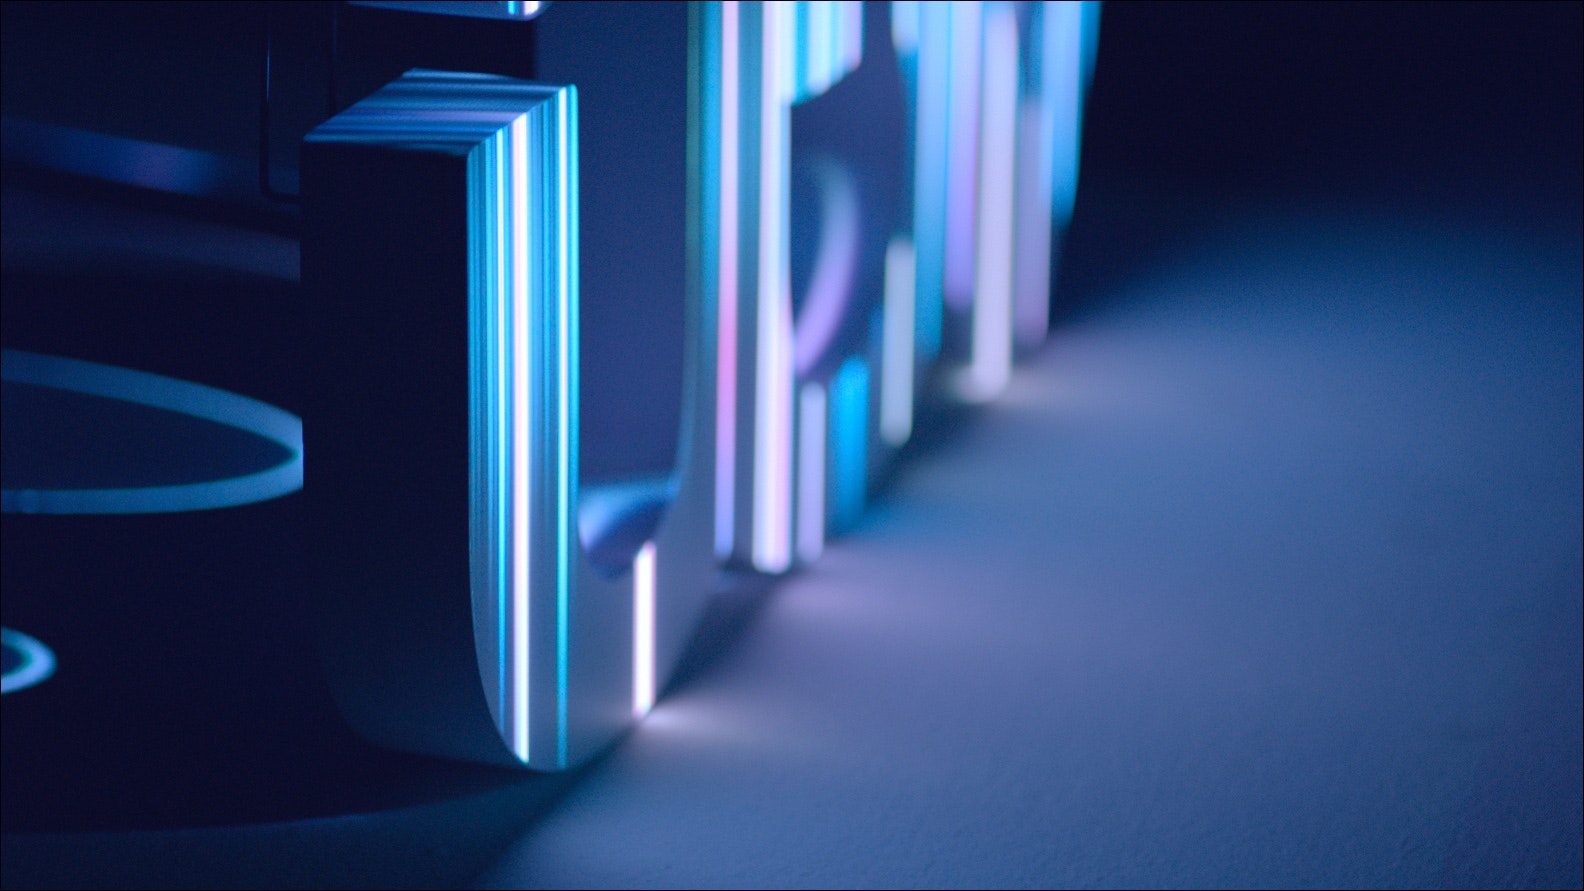 Jason Ford - ITV Logo Projection Mapping